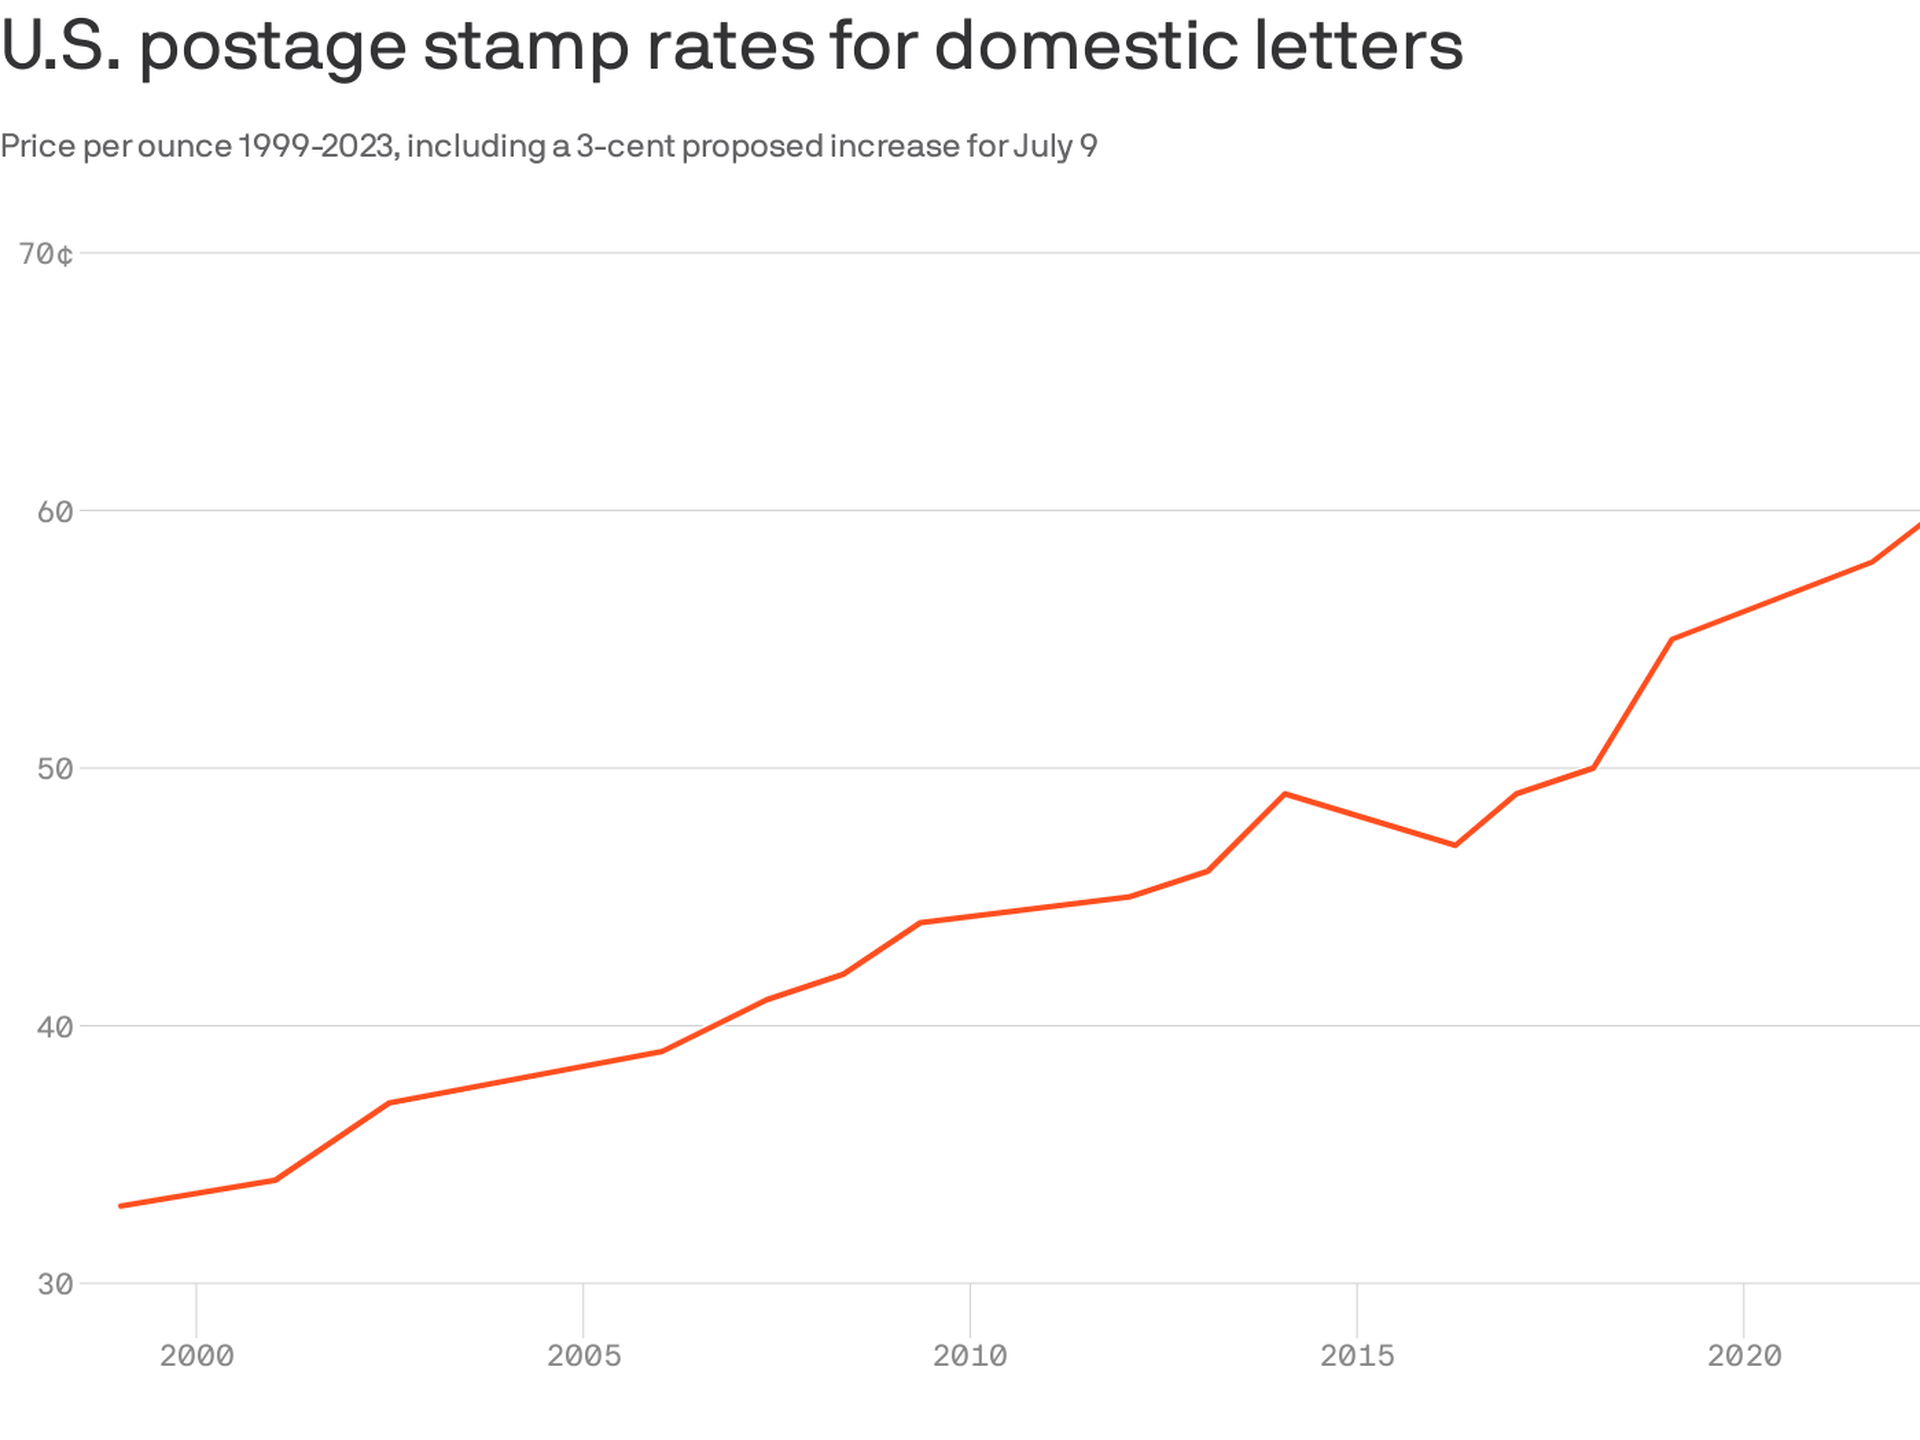 How much are stamps going up in 2023?